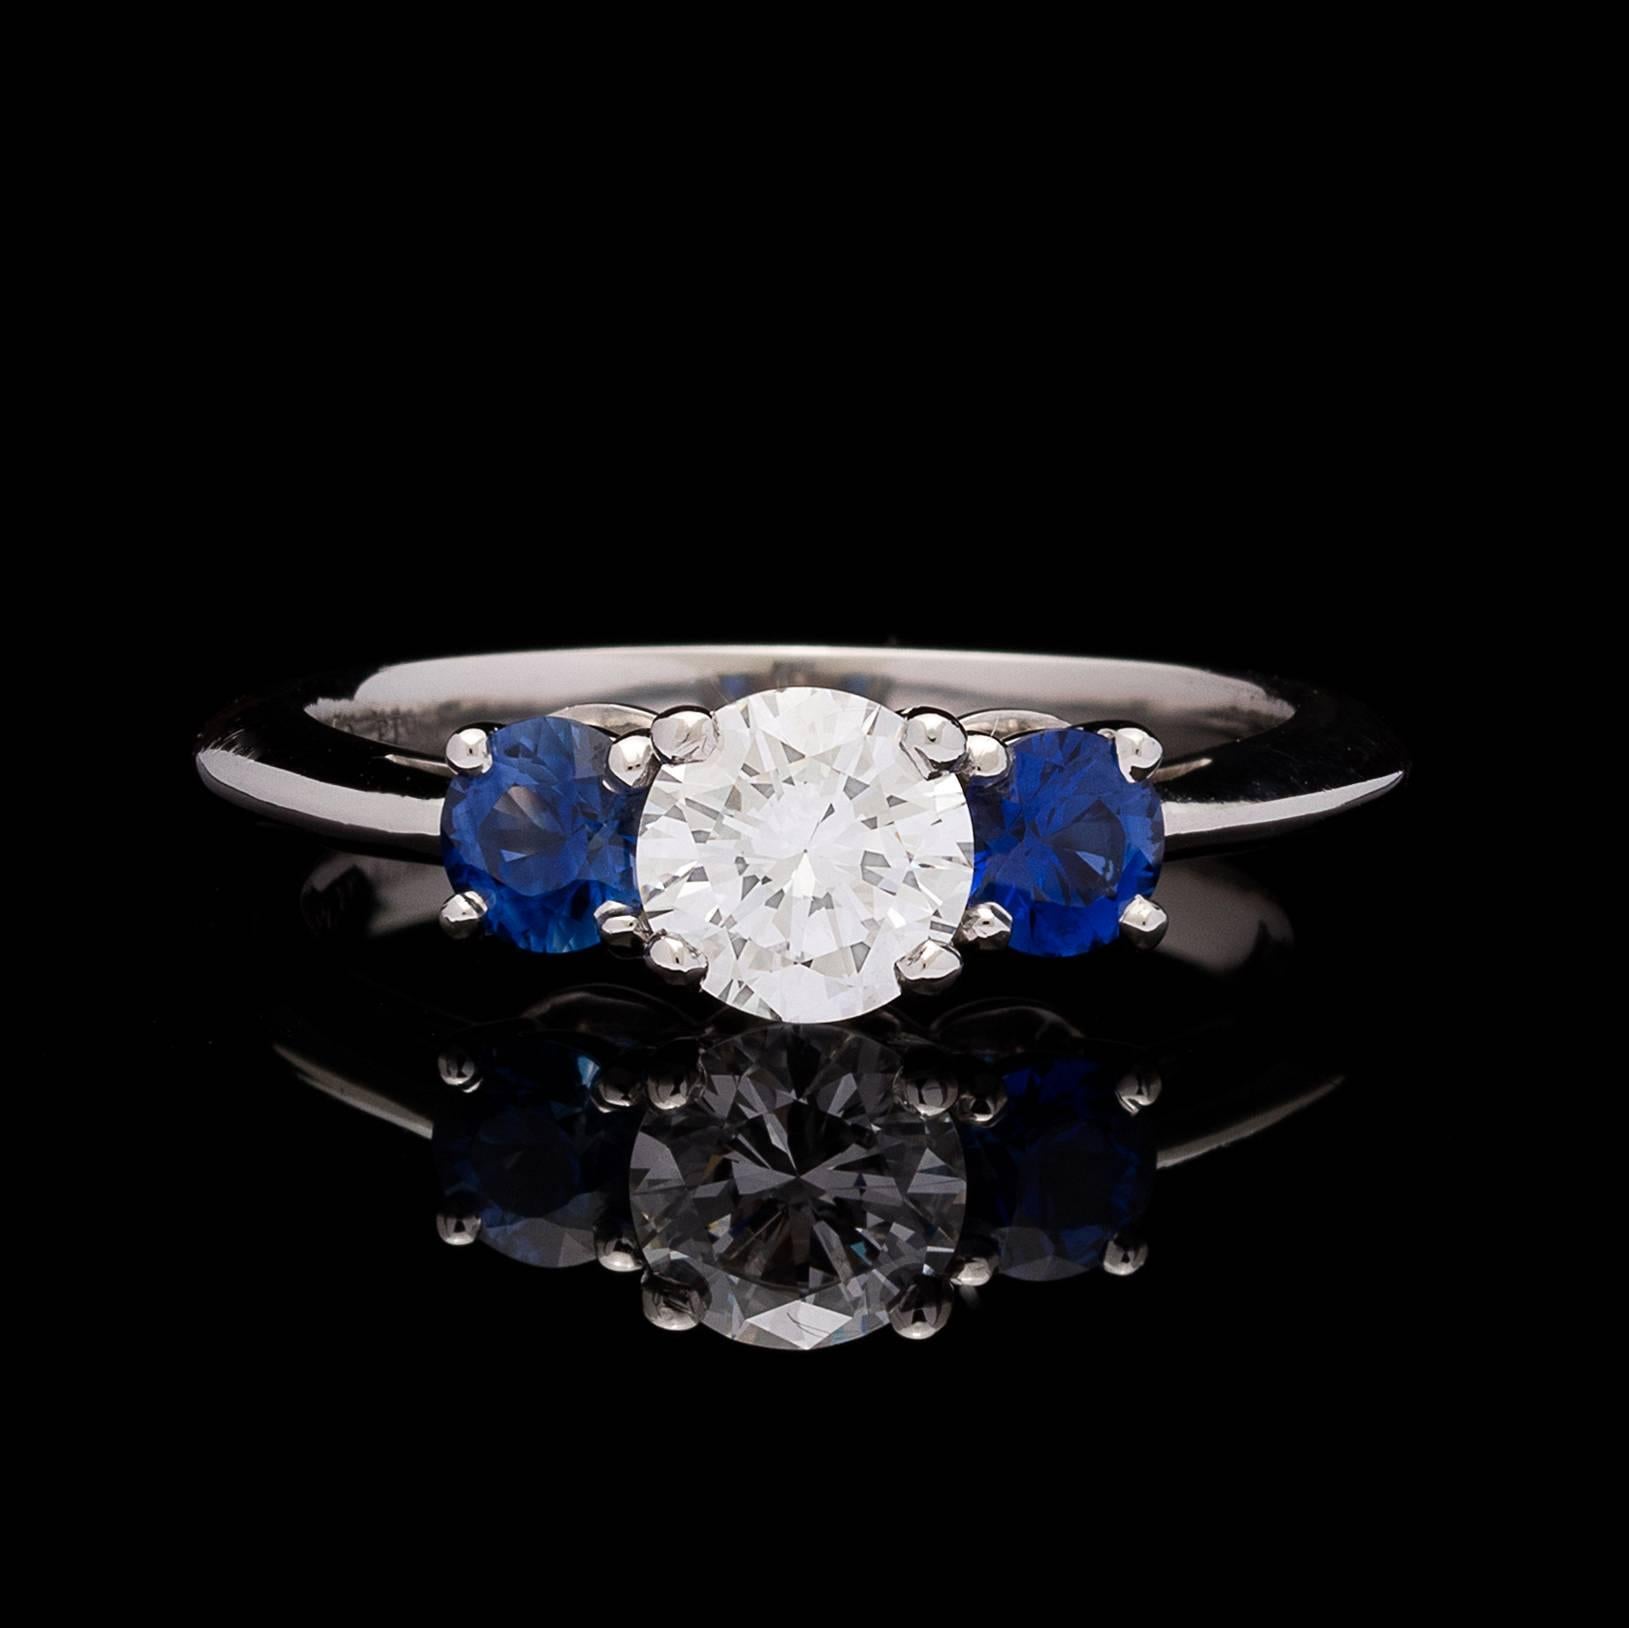 Tiffany & Co. 3-Stone Platinum ring features a GIA graded Round Brilliant Cut Diamond weighing 0.62 carats, with quality E color, and SI1 clarity.  Report # 2175209308 accompanies the diamond.   The 2 round sapphires totals approximately 0.50